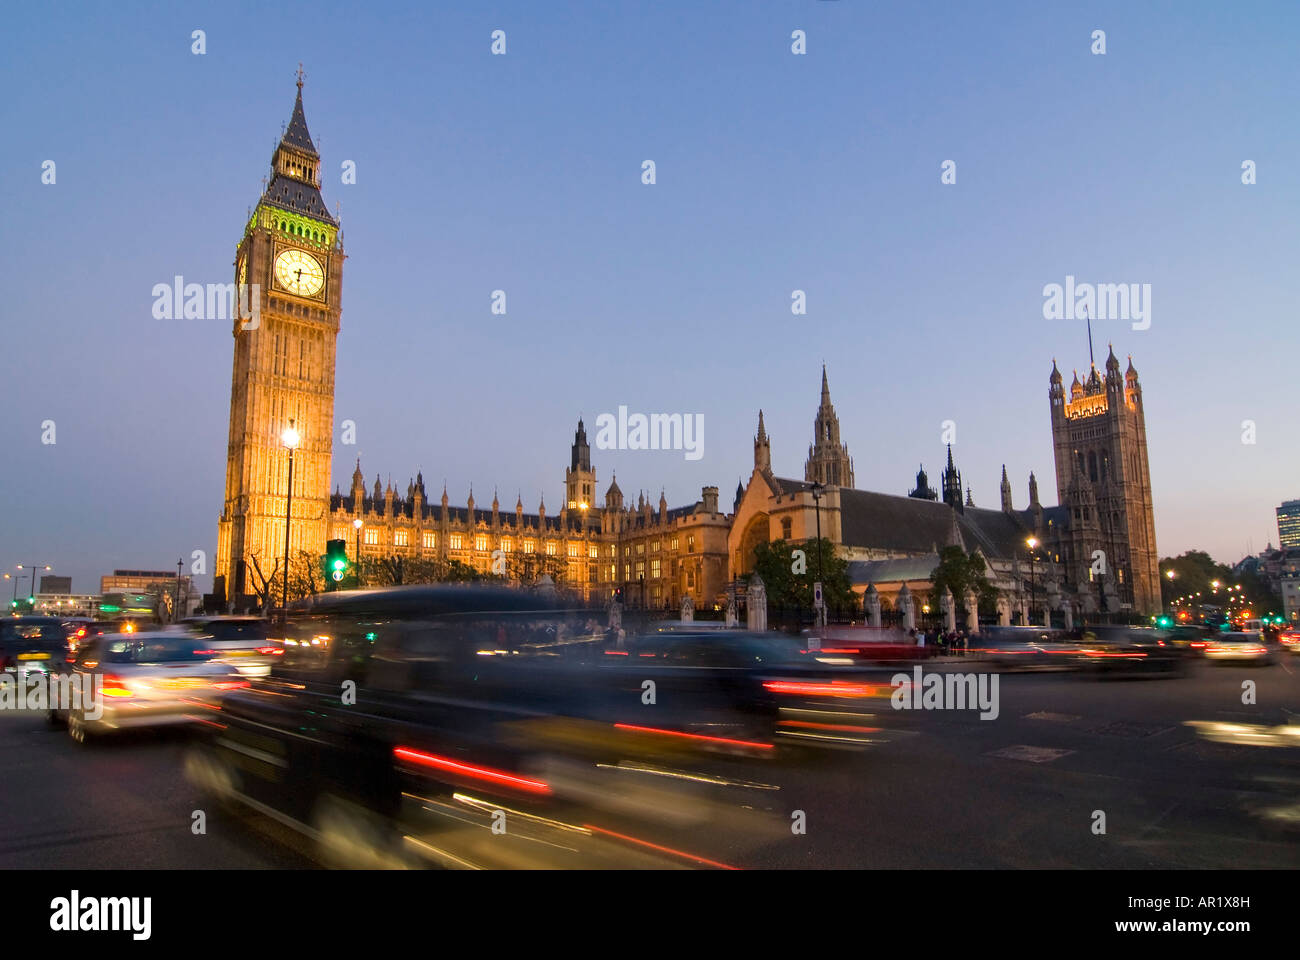 Horizontal wide angle of the Houses of Parliament and Big Ben in Westminster with traffic zooming passed illuminated at night. Stock Photo